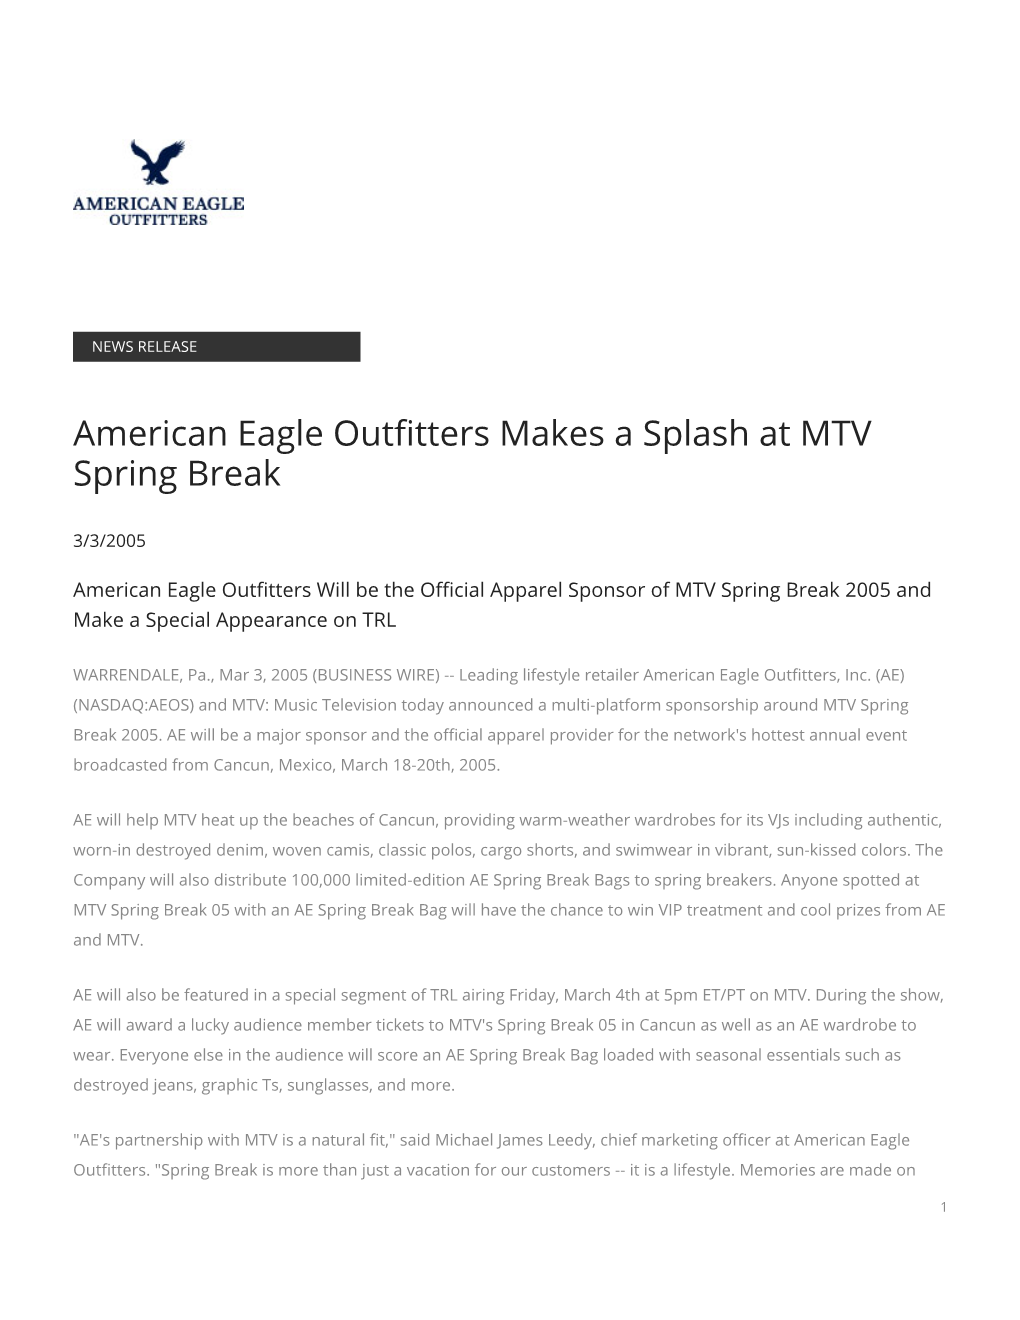 American Eagle Outfitters Makes a Splash at MTV Spring Break